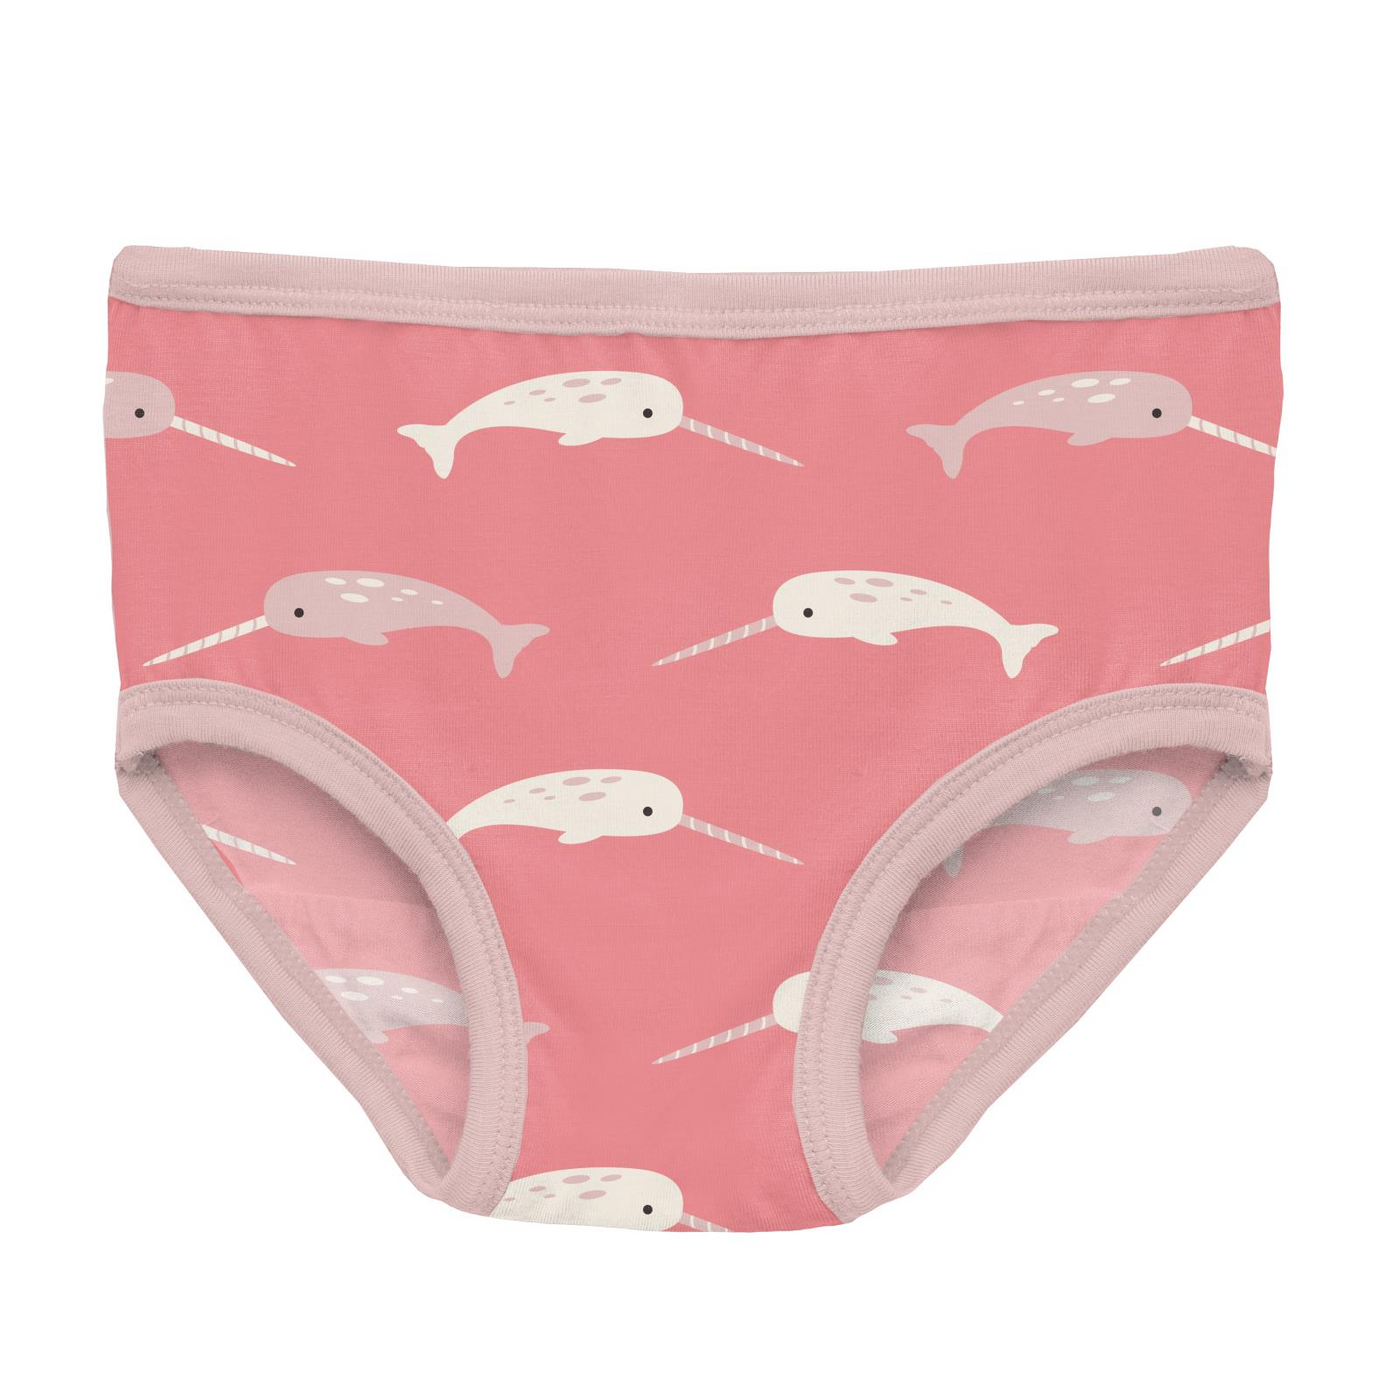 Kickee Pants Girl's Underwear: Strawberry Narwhal